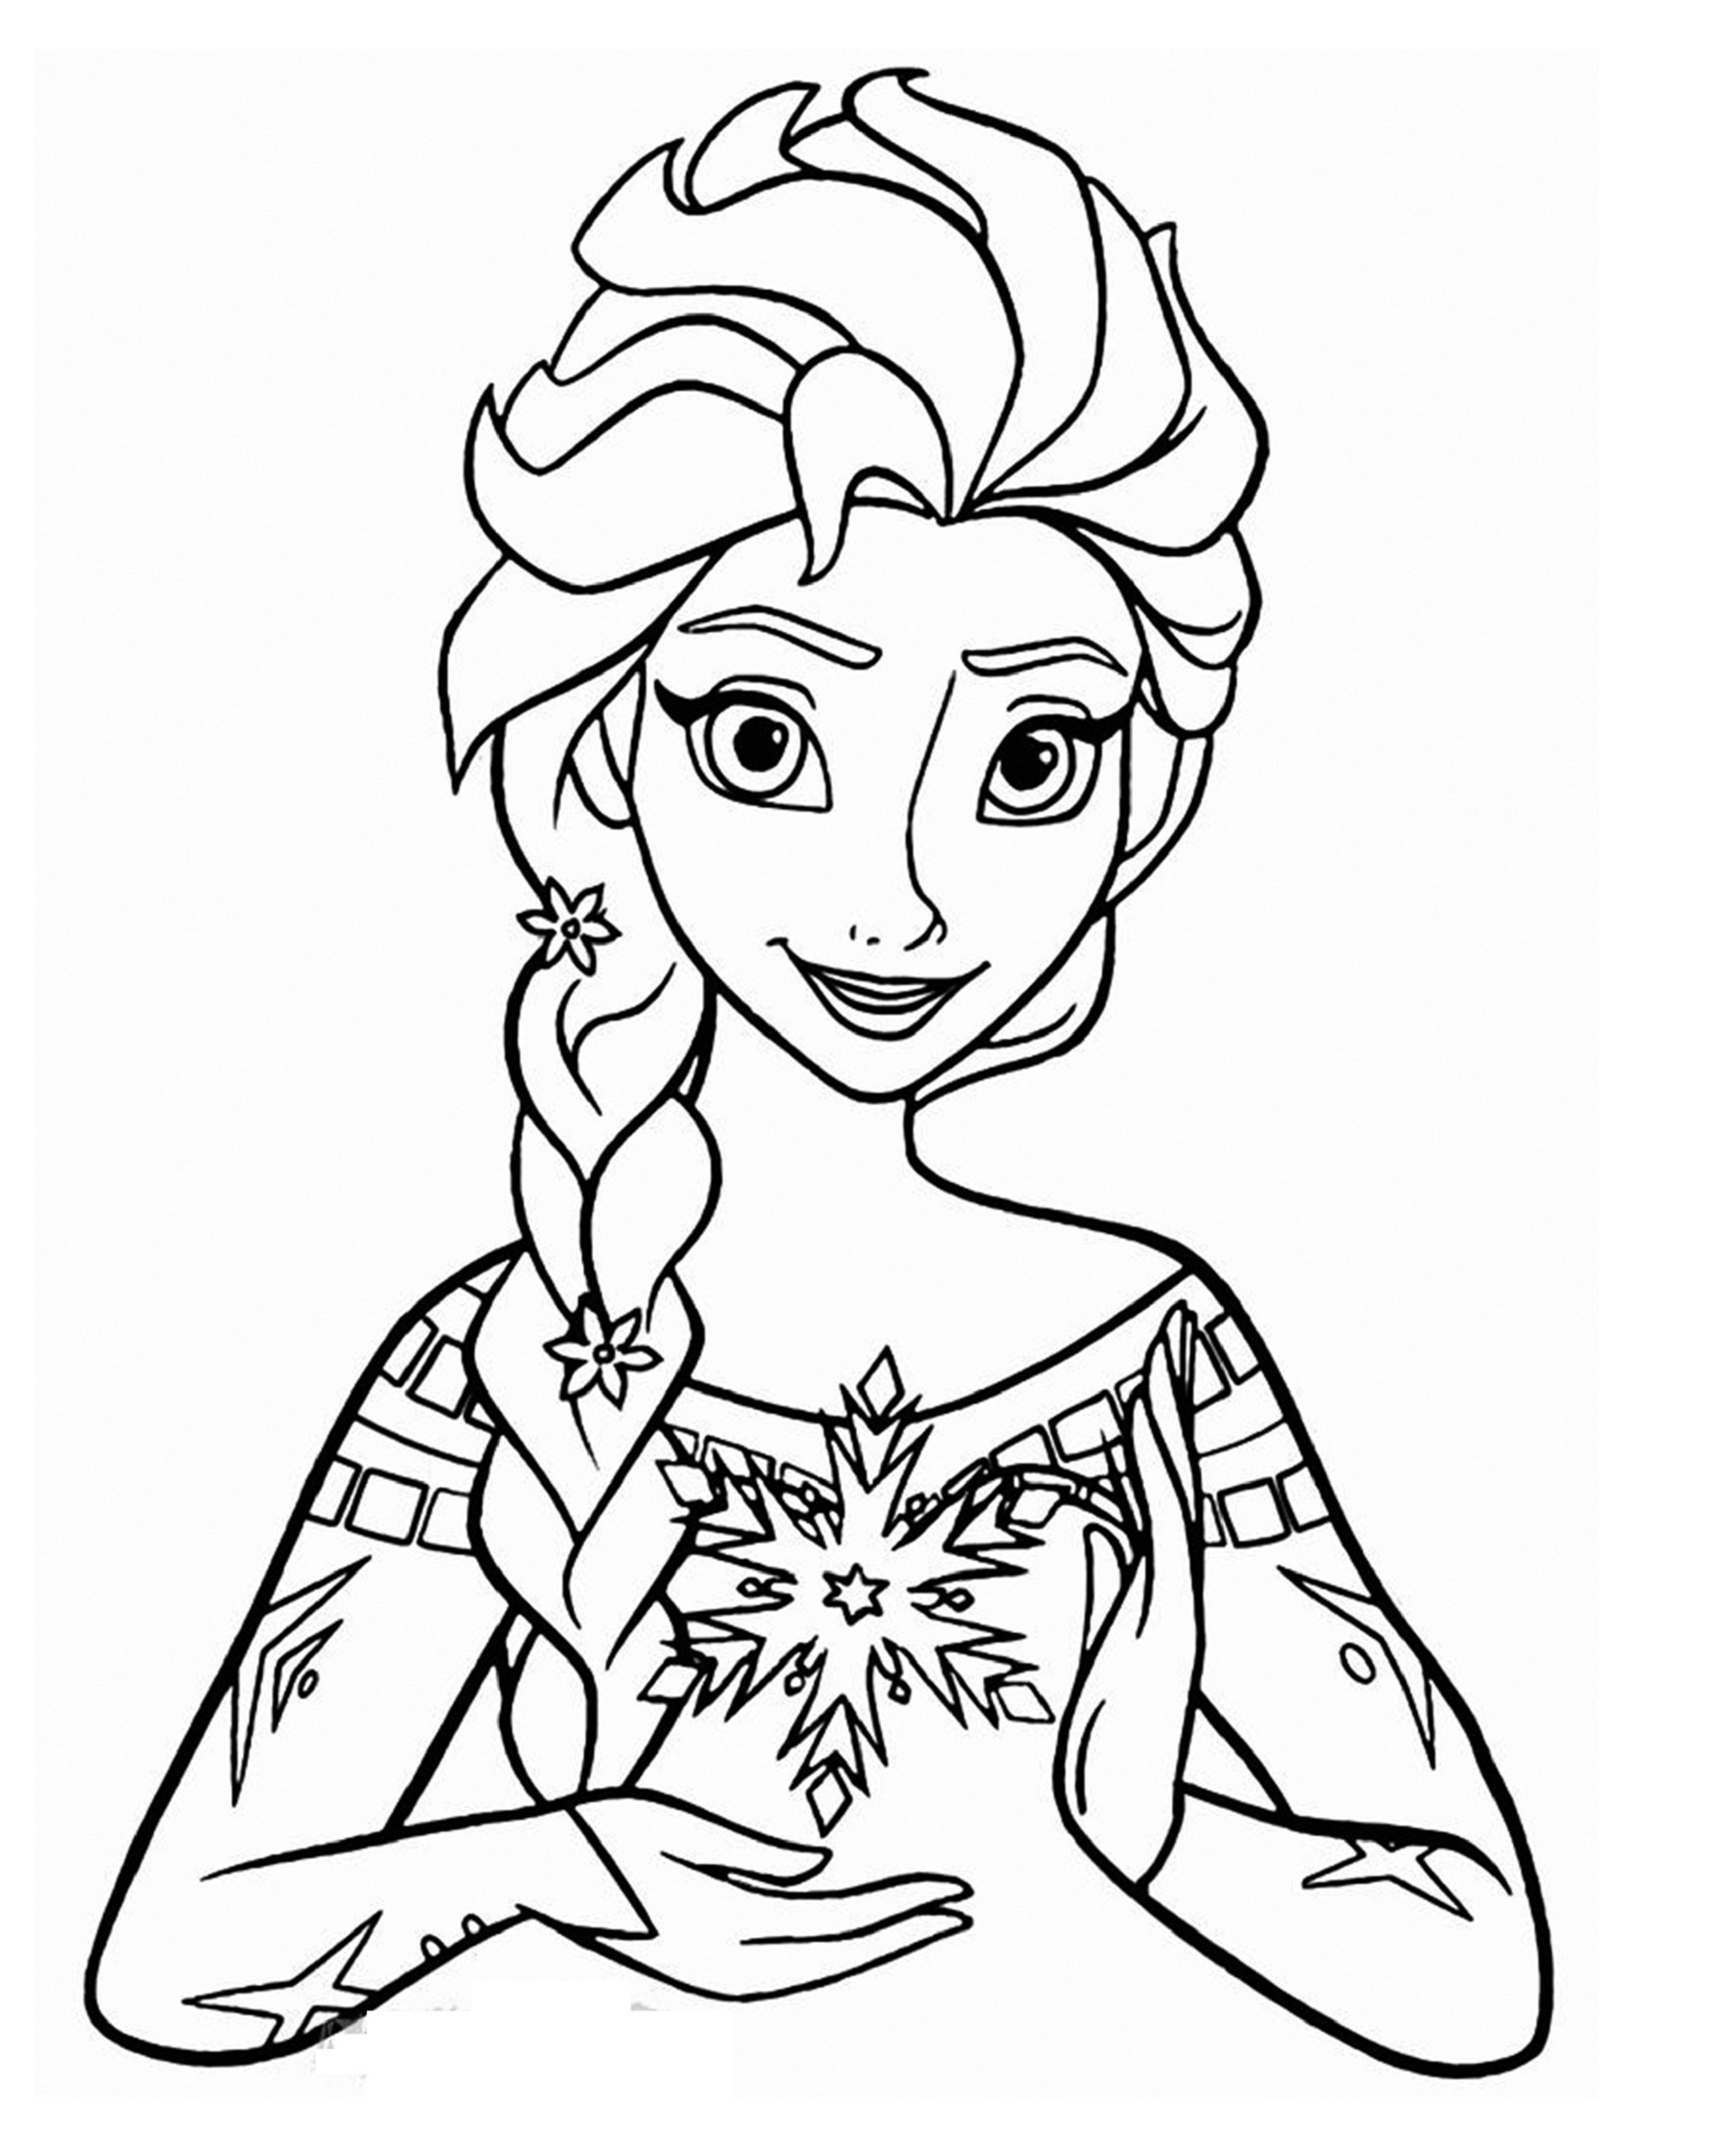 Printable Elsa holding a snow star Coloring Page for kids.